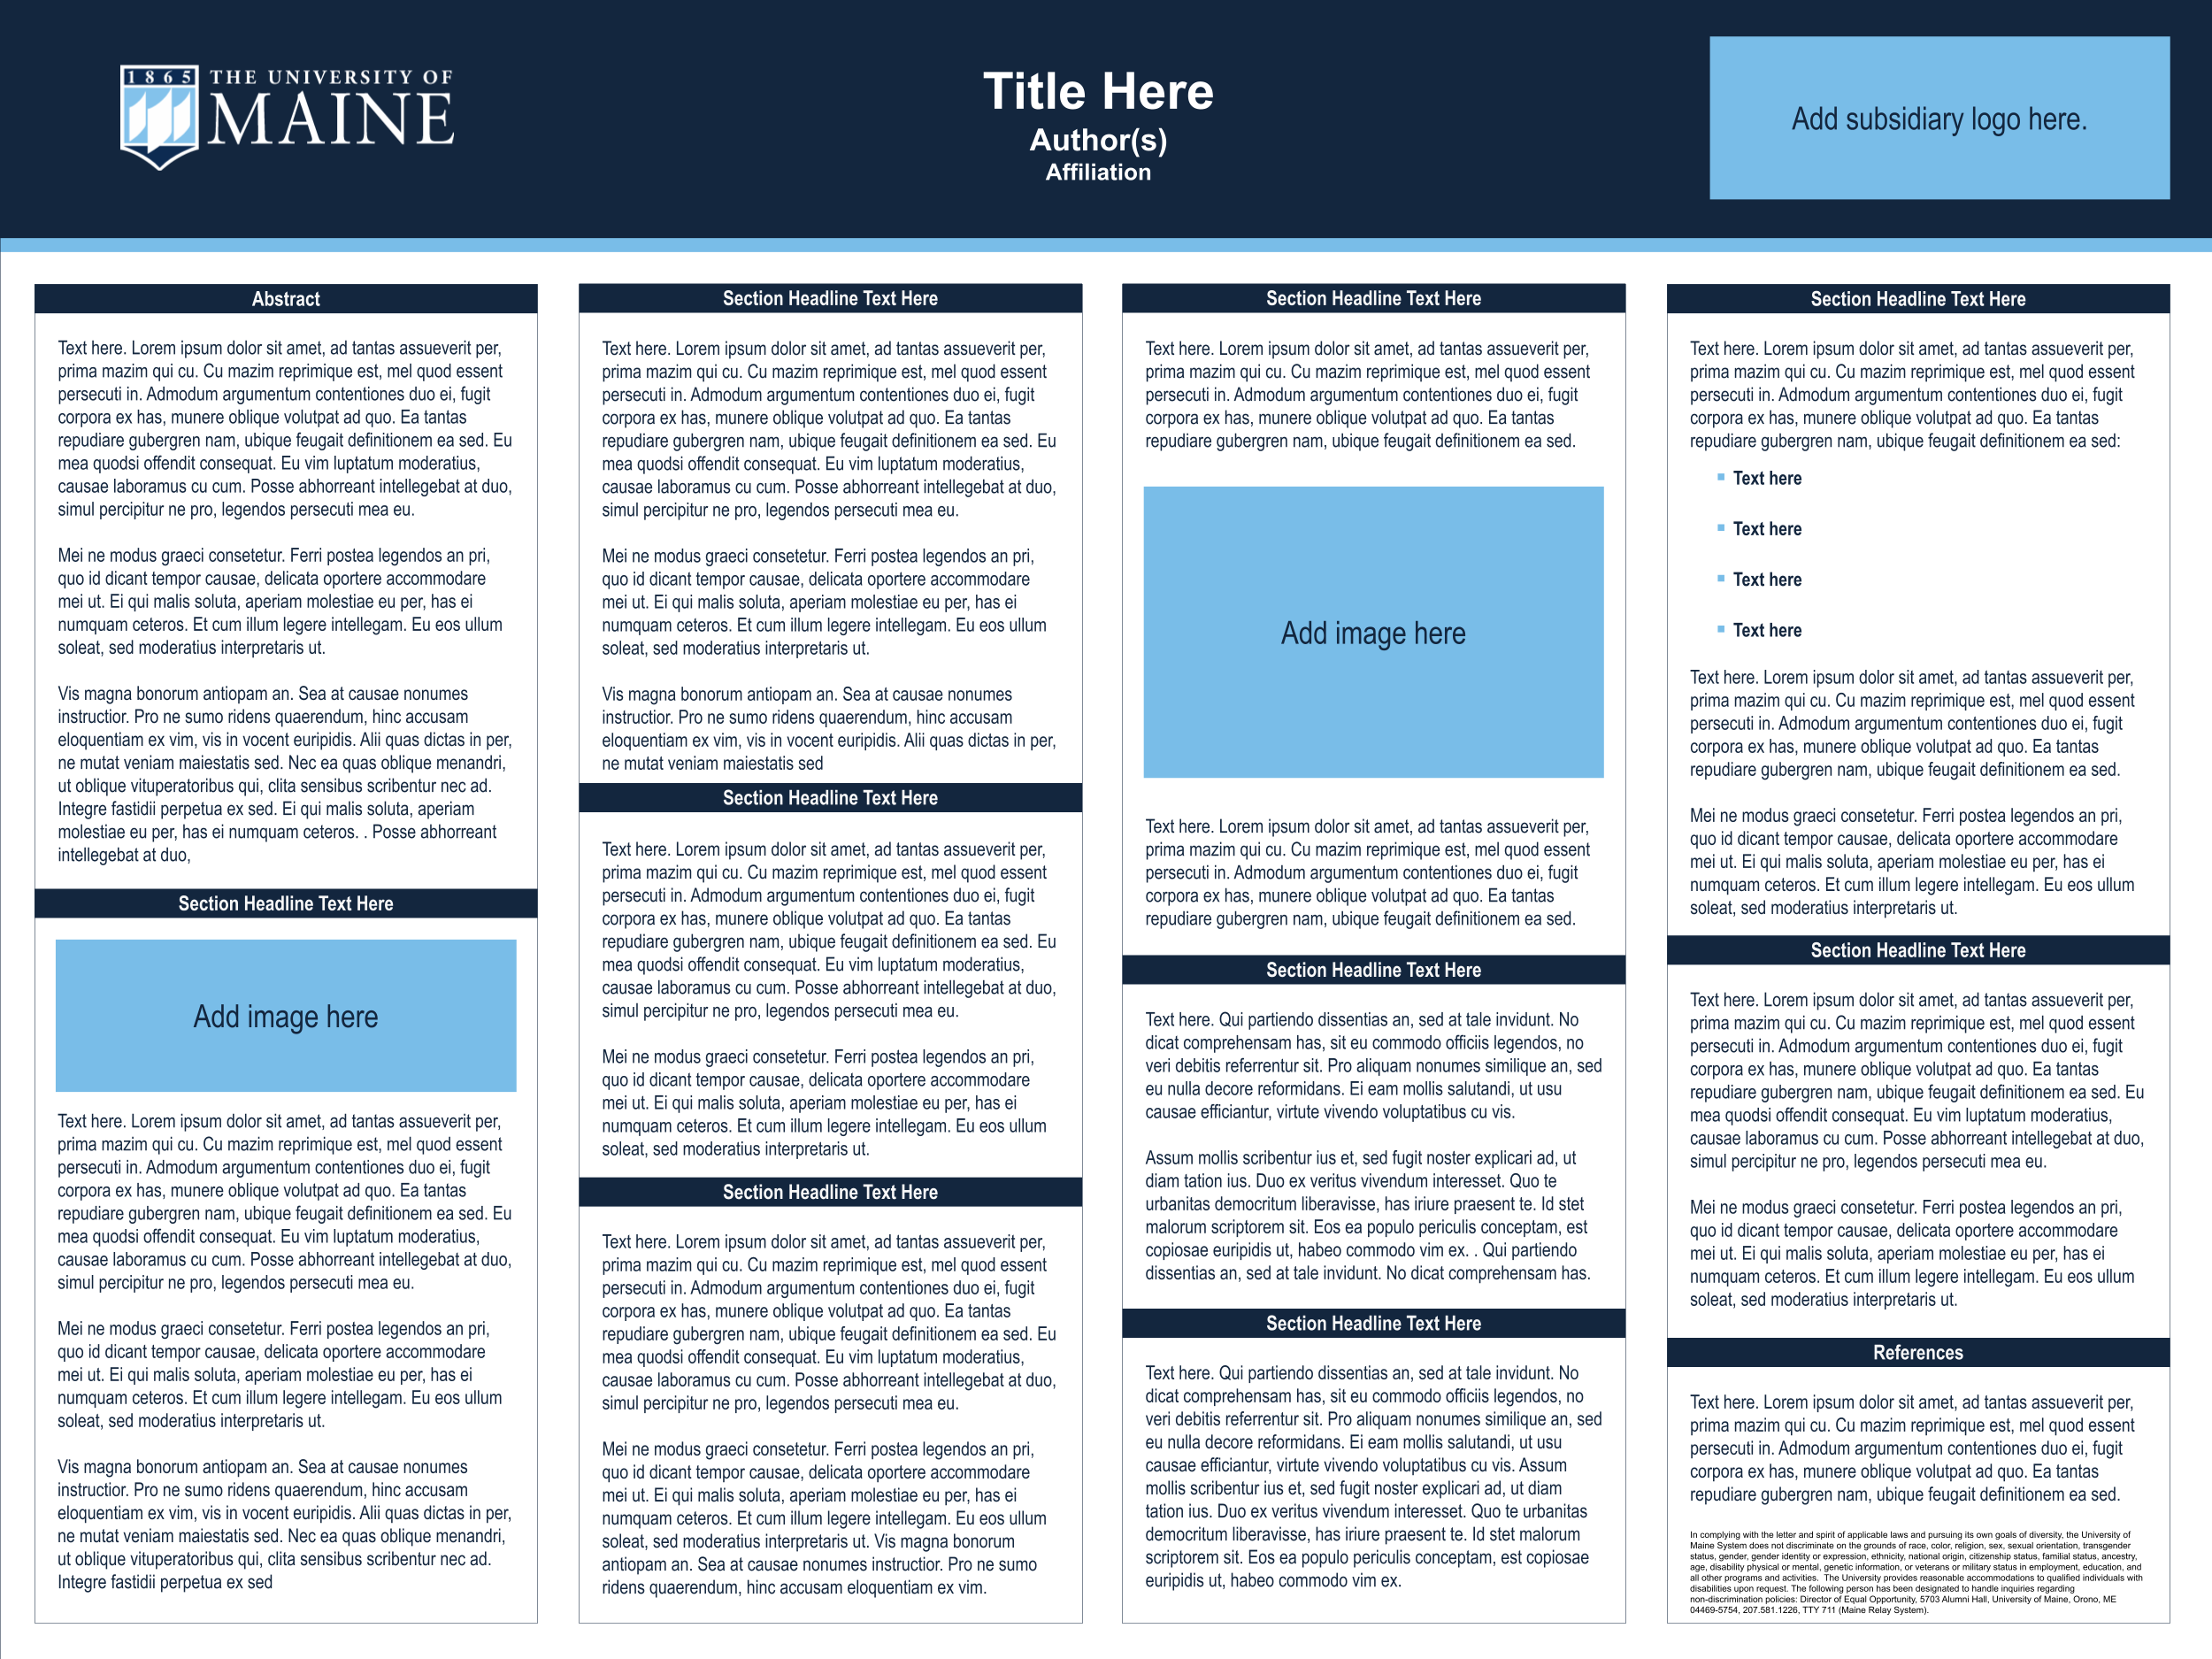 A UMaine research poster template